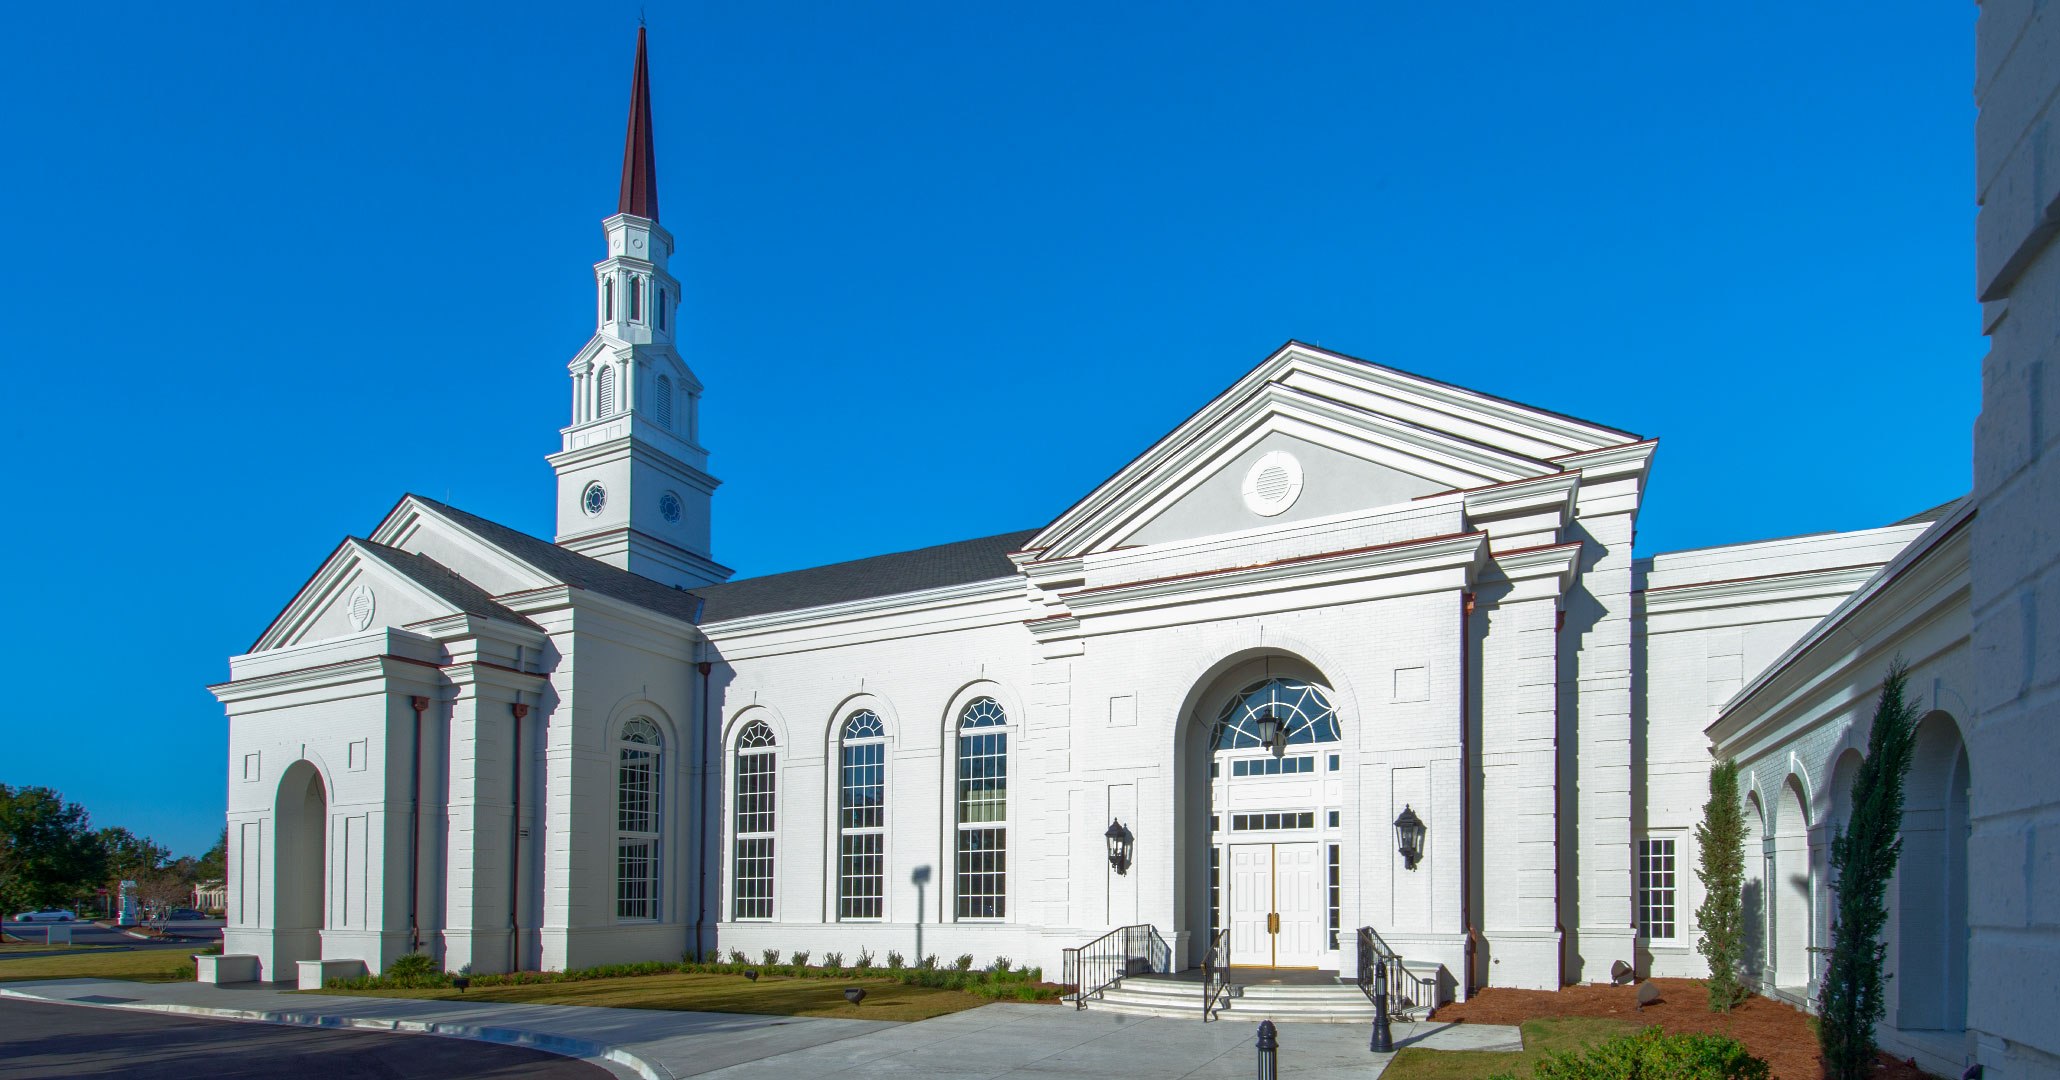 Church project designed by Boudreaux architects at First Presbyterian Church in Myrtle Beach, SC.